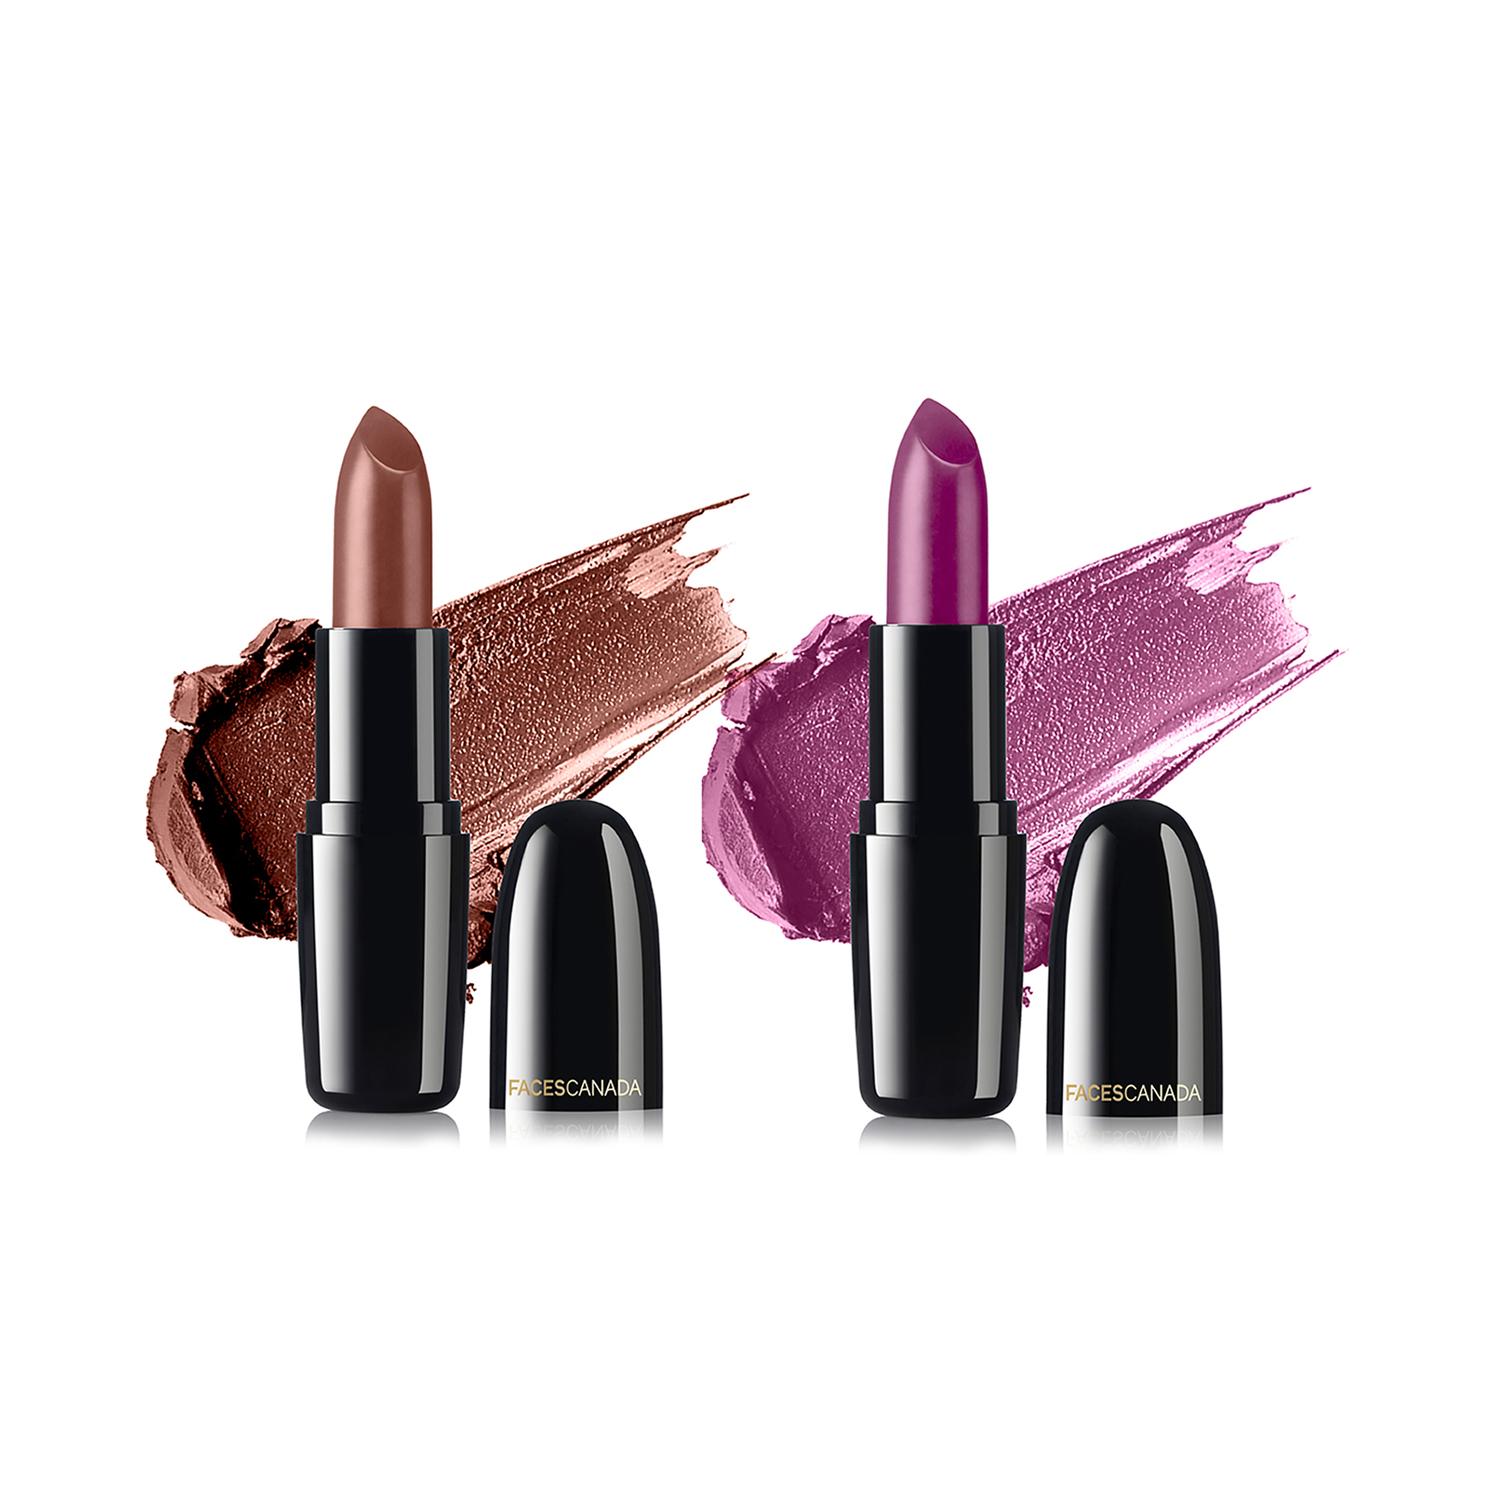 Faces Canada | Faces Canada Festive Pout - Weightless Creme Finish Lipstick Pack of 2 - Sweet Mocha & Imperial Plum